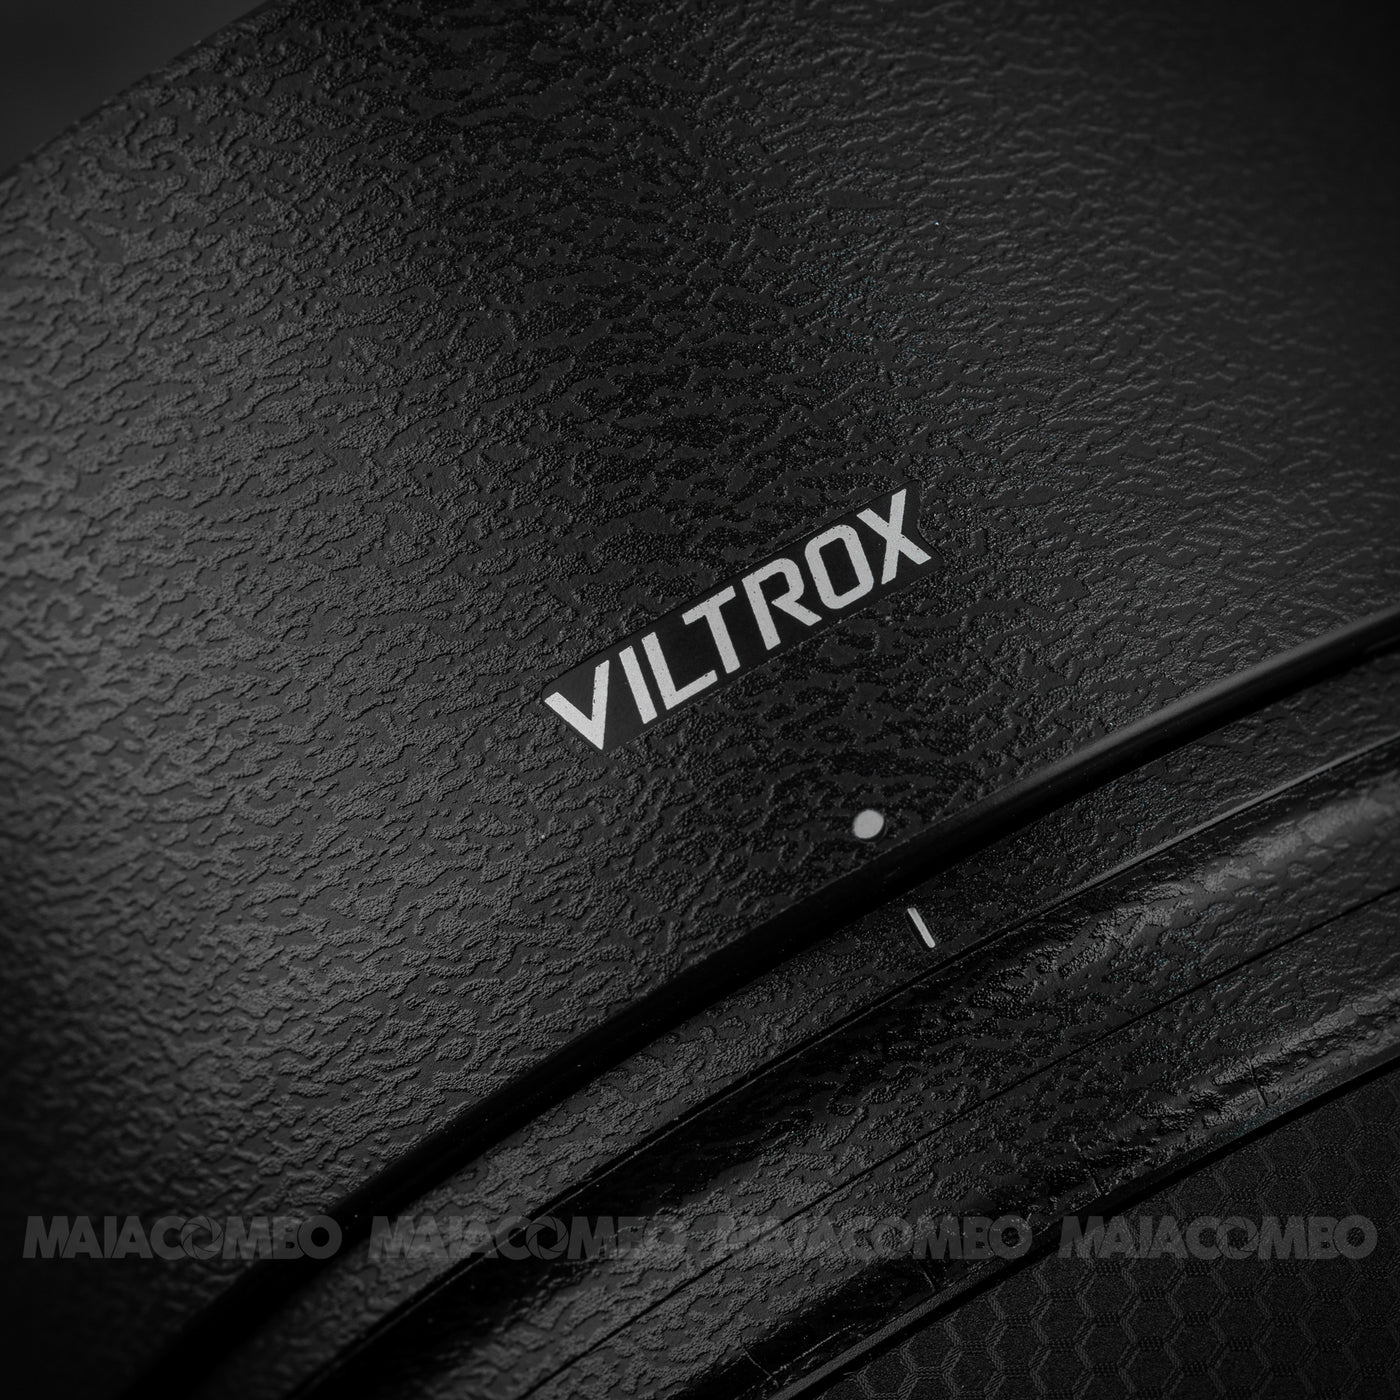 Viltrox AF 75mm f/1.2 E For Sony